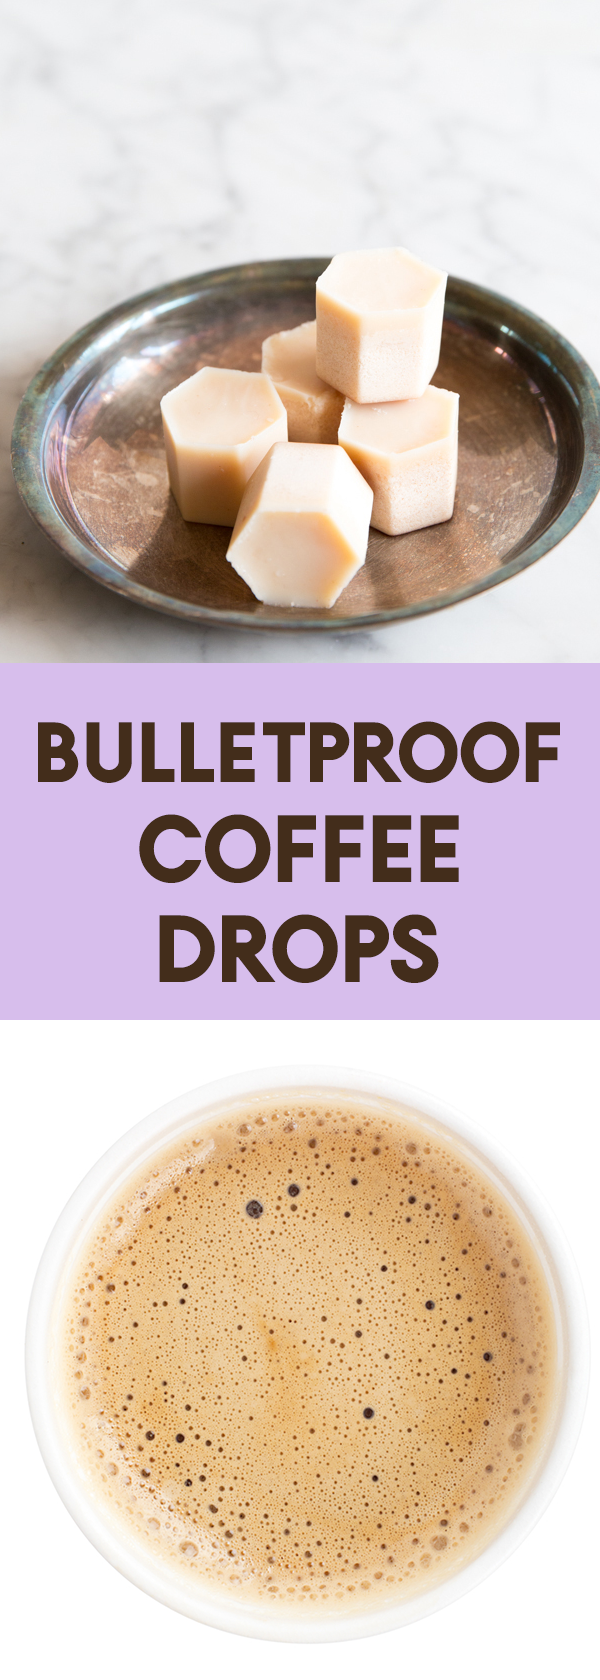 Packed full of healthy fats, these bulletproof coffee drops will make your keto coffee a breeze! Use them to make your butter coffee in minutes!